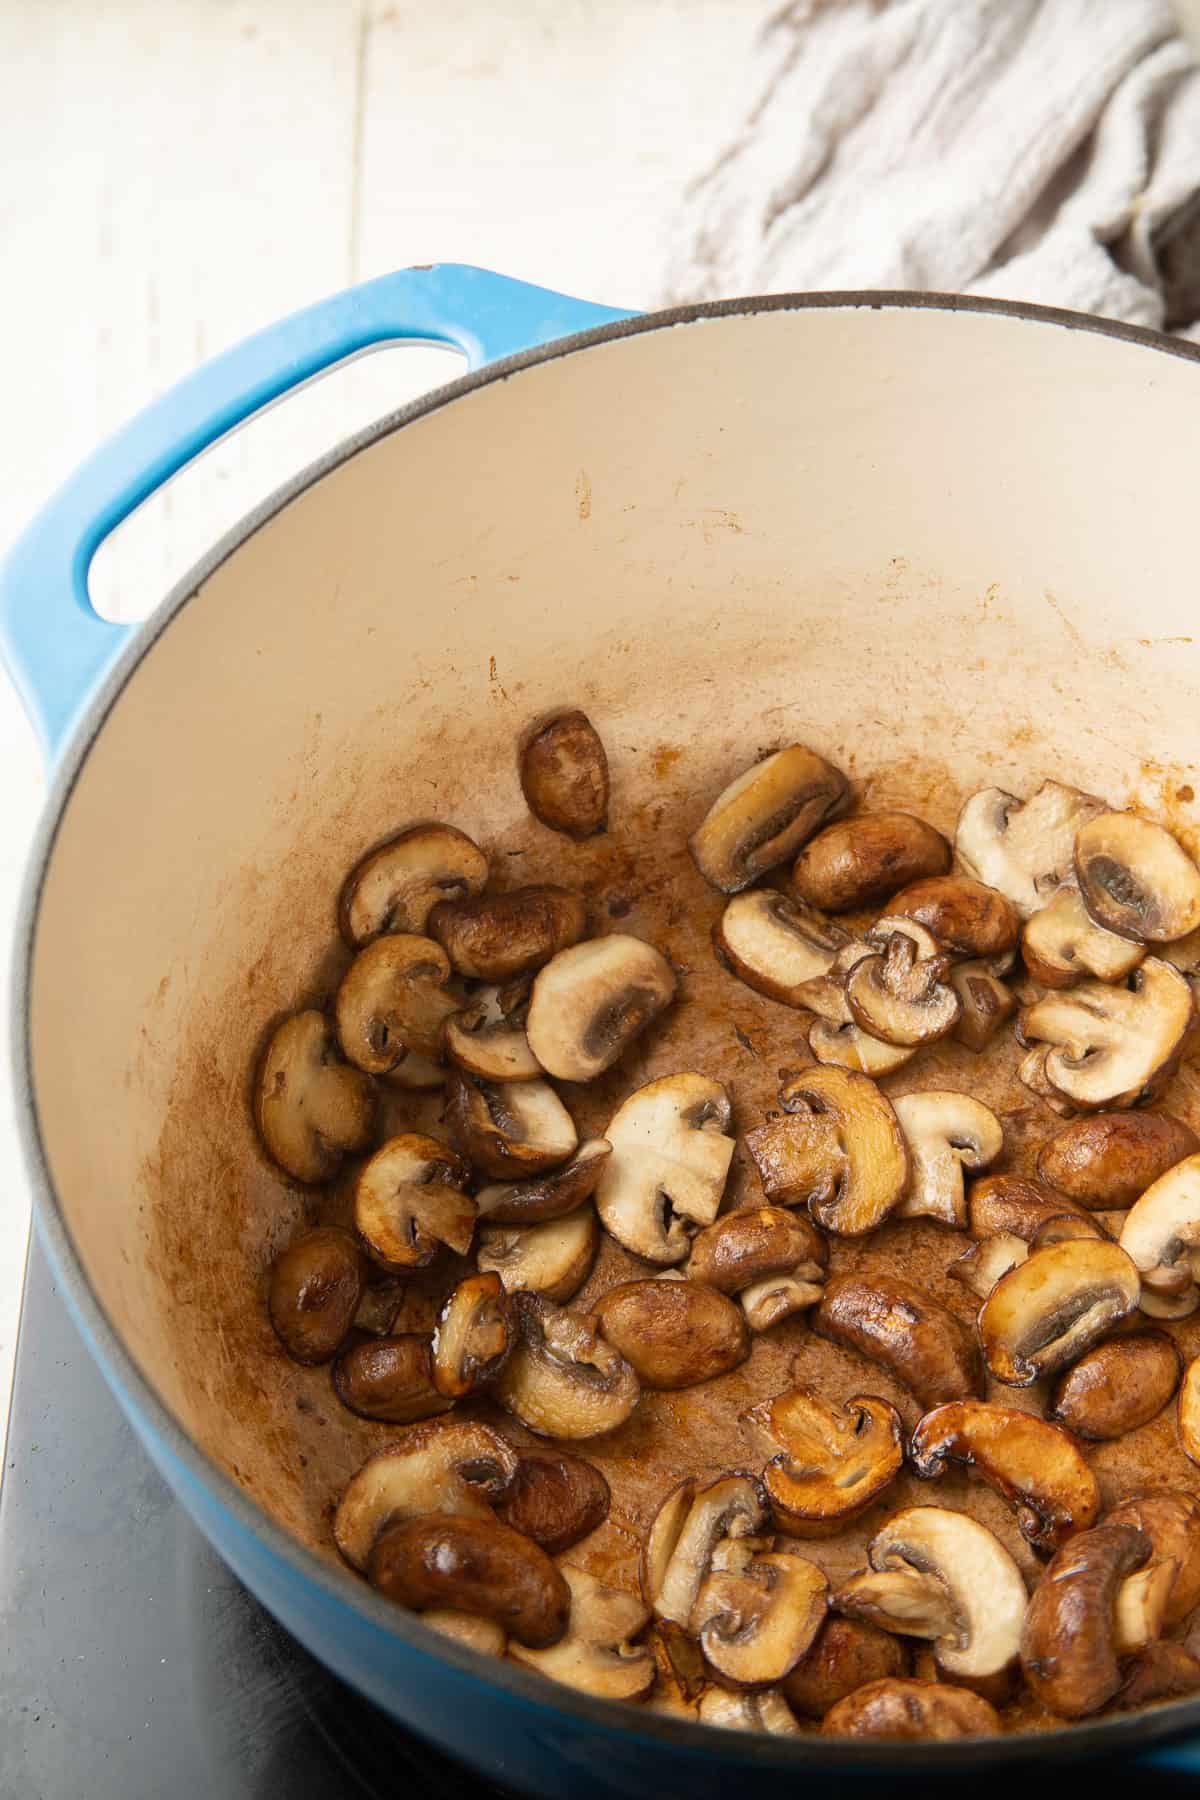 Mushrooms cooking in a pot.